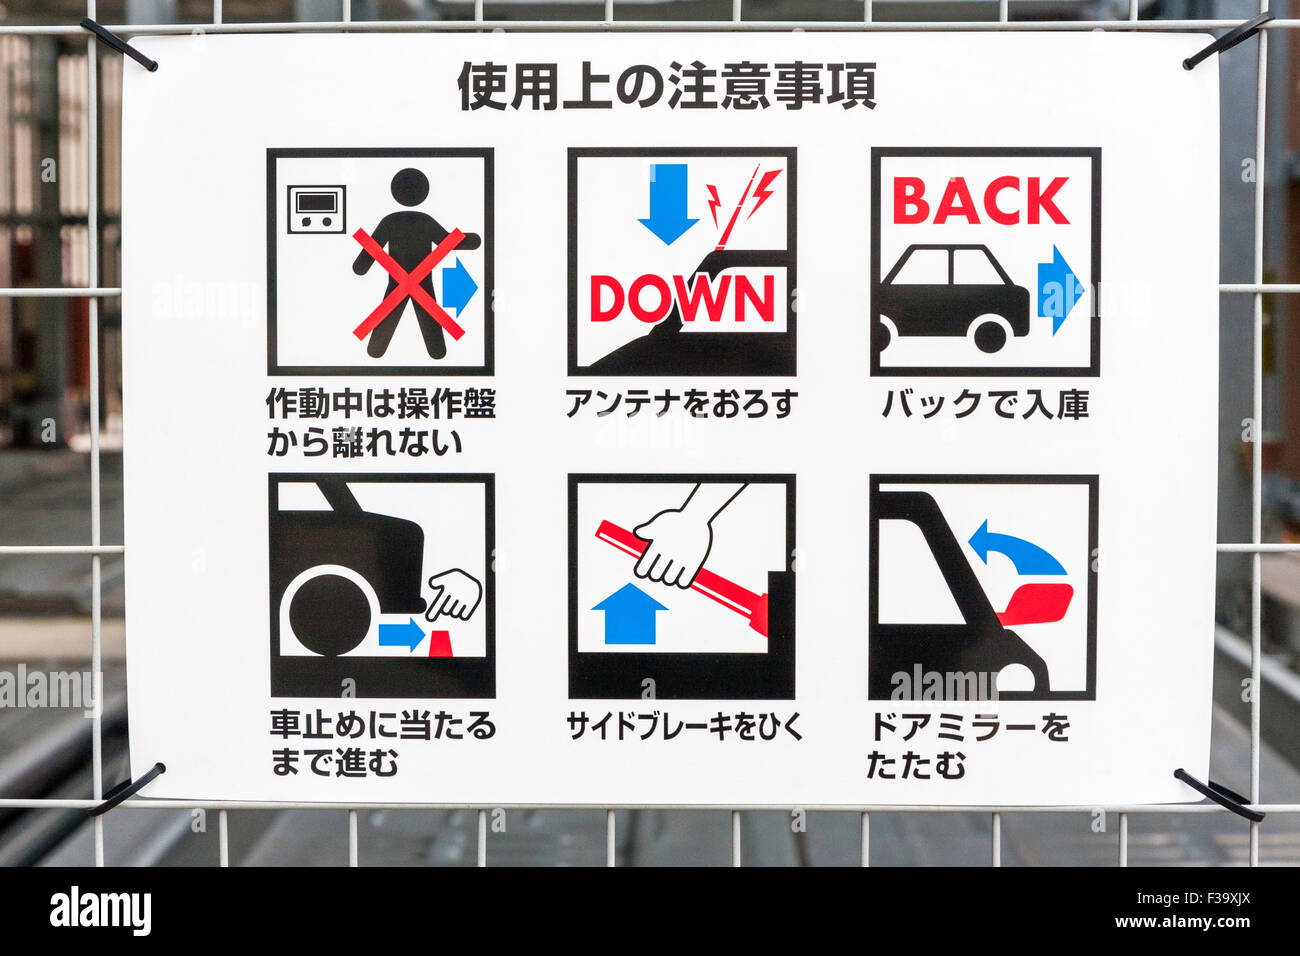 Japan, information sign on how to use multi-storey car parking space with six diagrams showing how to use and what not to do. Stock Photo